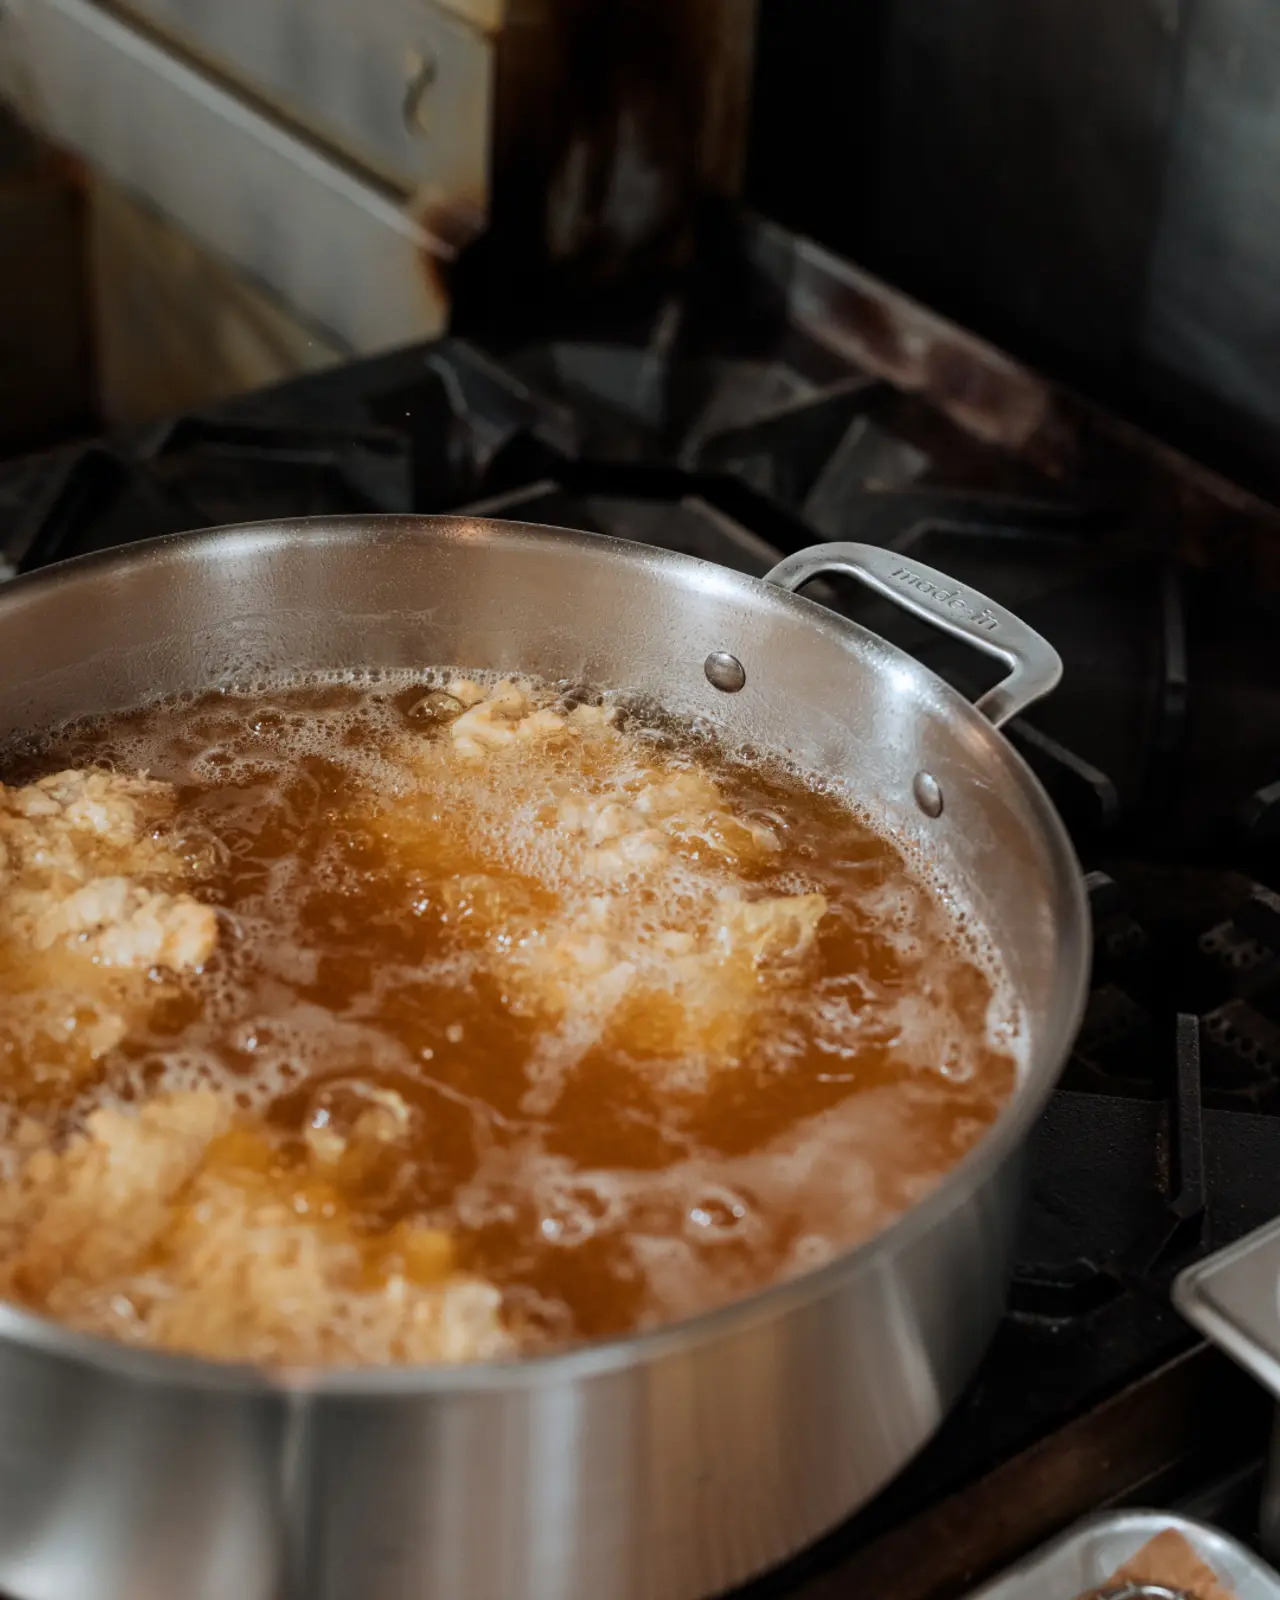 A large pot is simmering on the stove with golden-brown food items frying in bubbling oil.